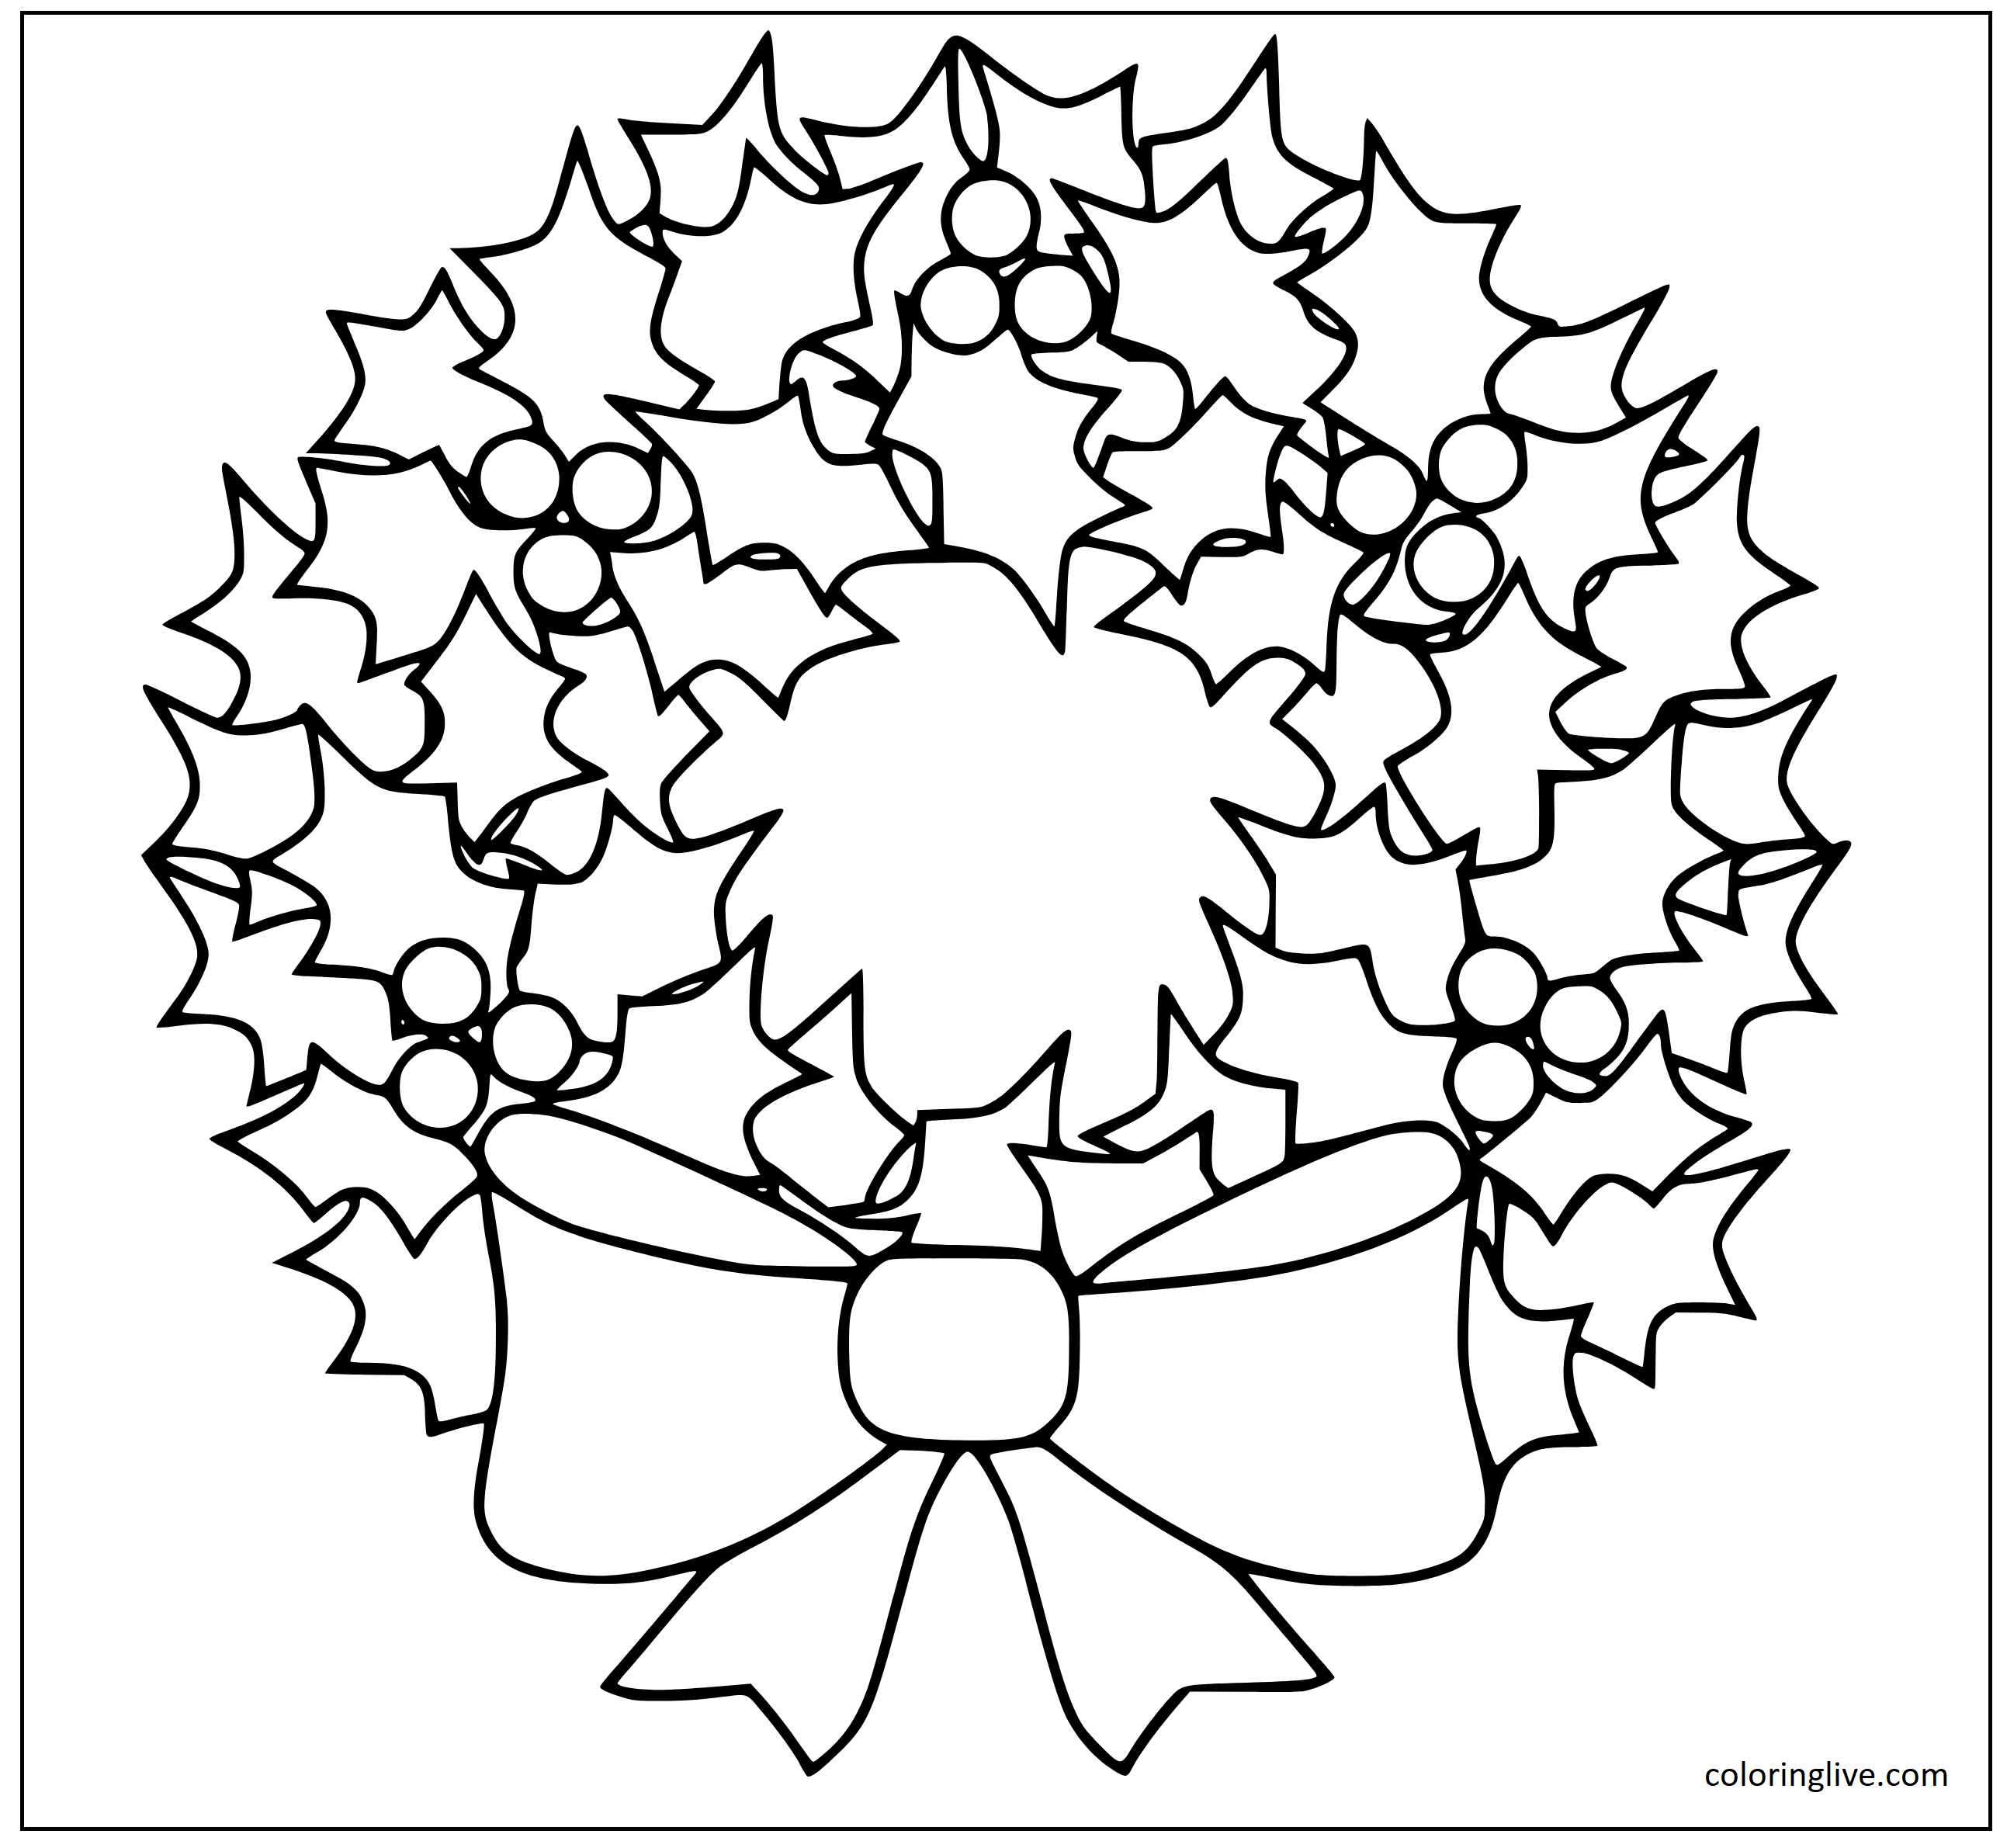 Printable Poinsettia Christmas Wreath Coloring Page for kids.